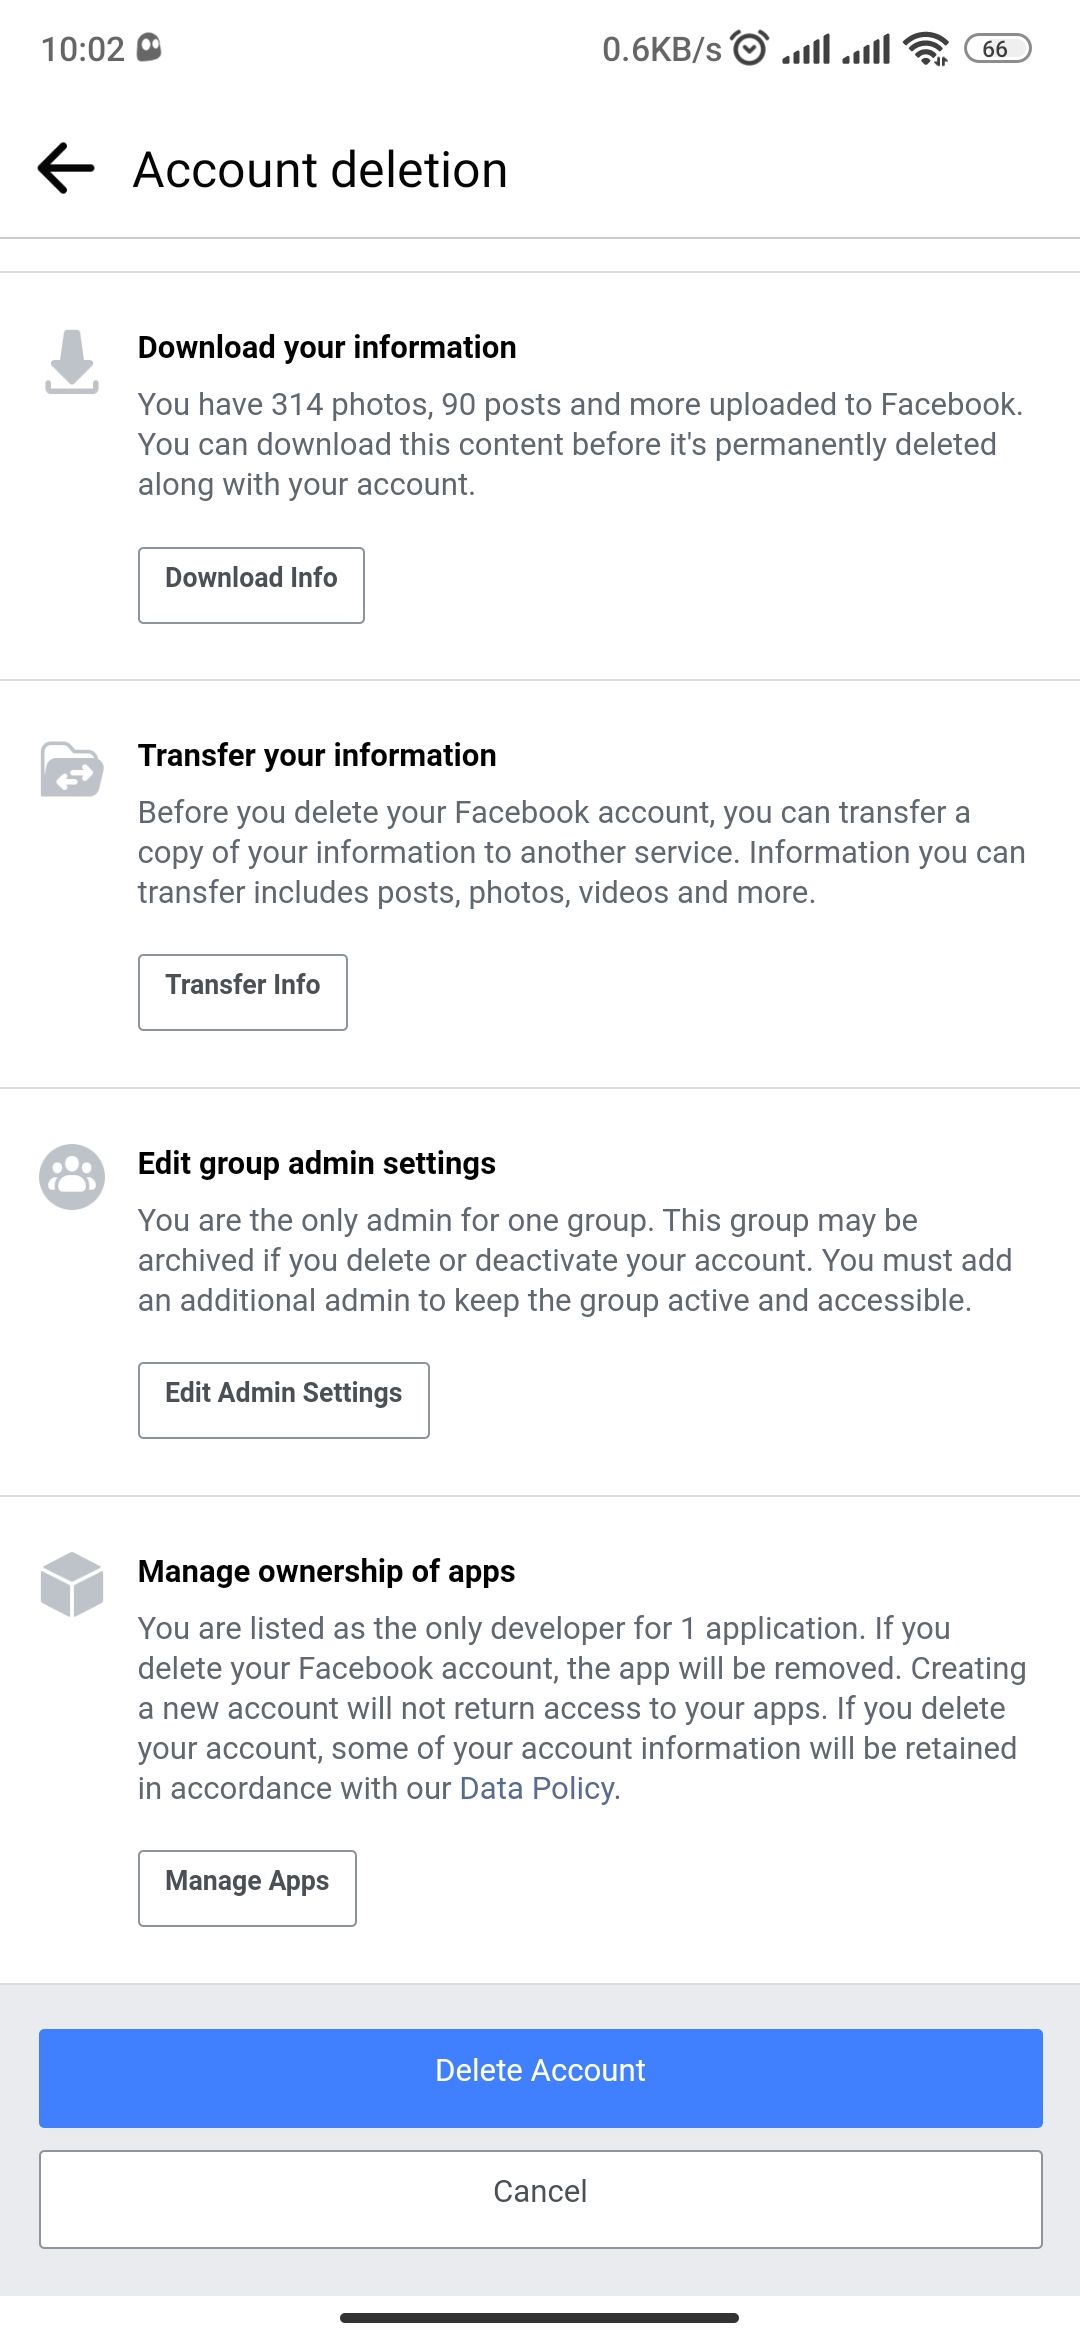 Account deletion page on Facebook Android